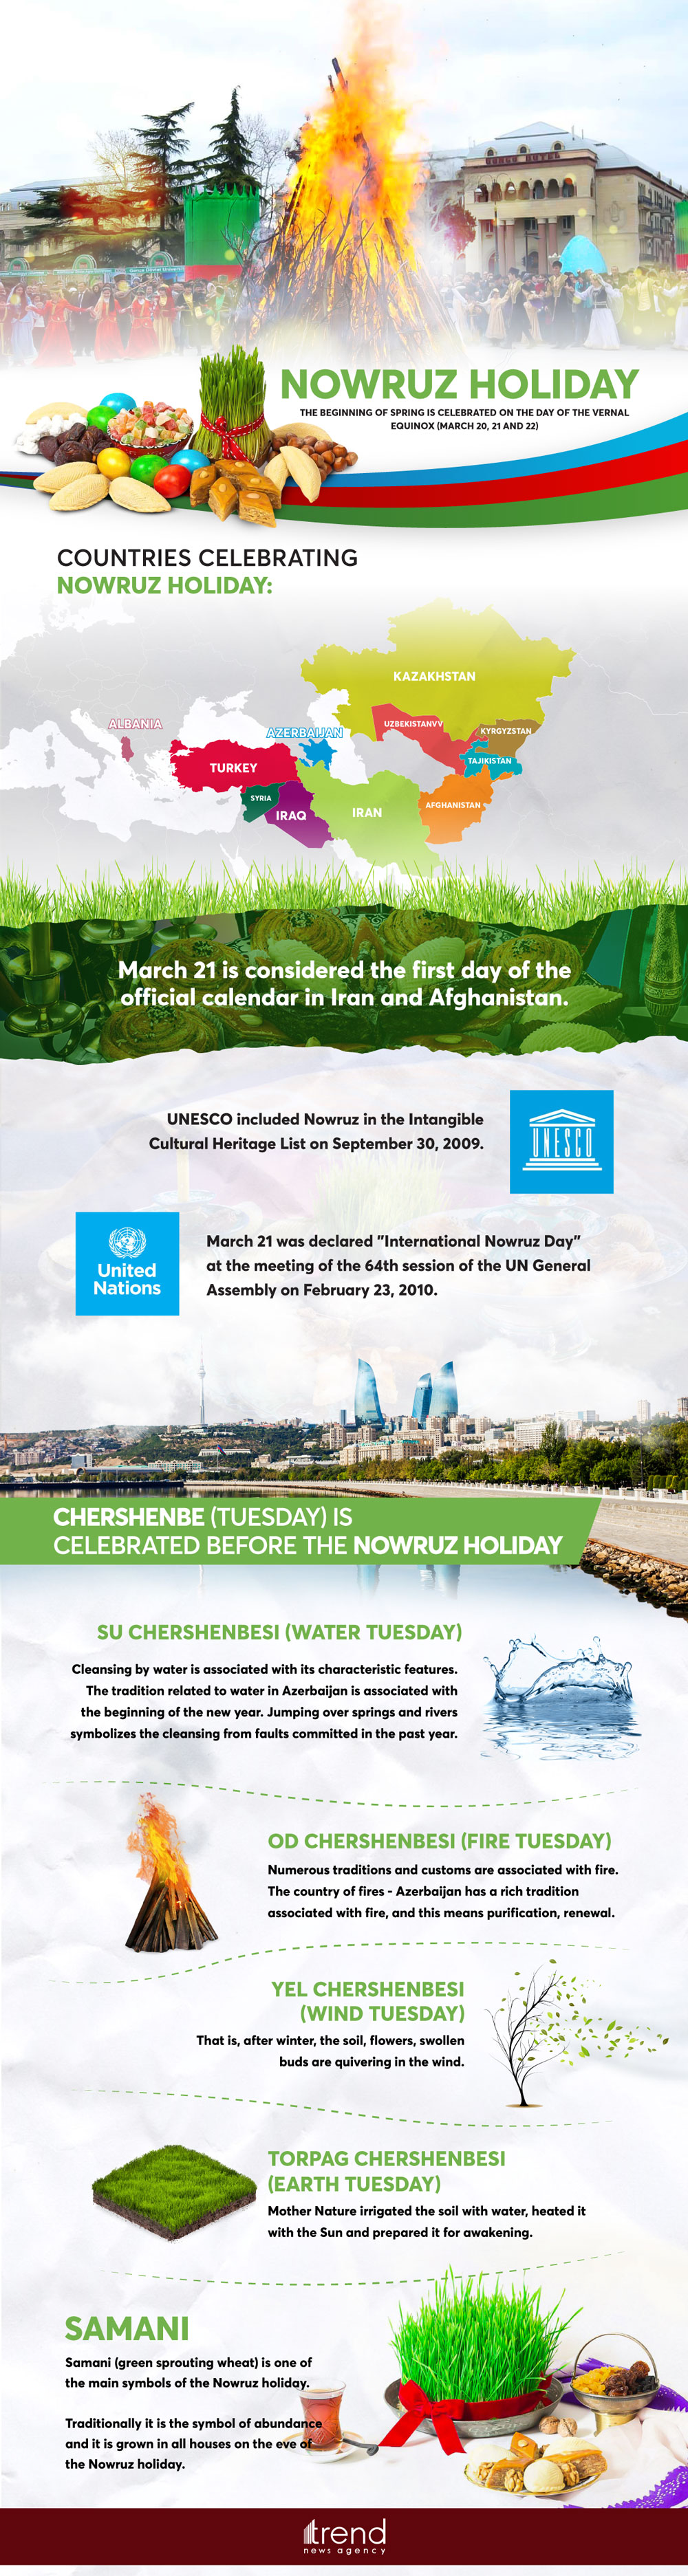 Nowruz holiday – The beginning of spring is celebrated on the day of the vernal equinox (March 20, 21 and 22) 